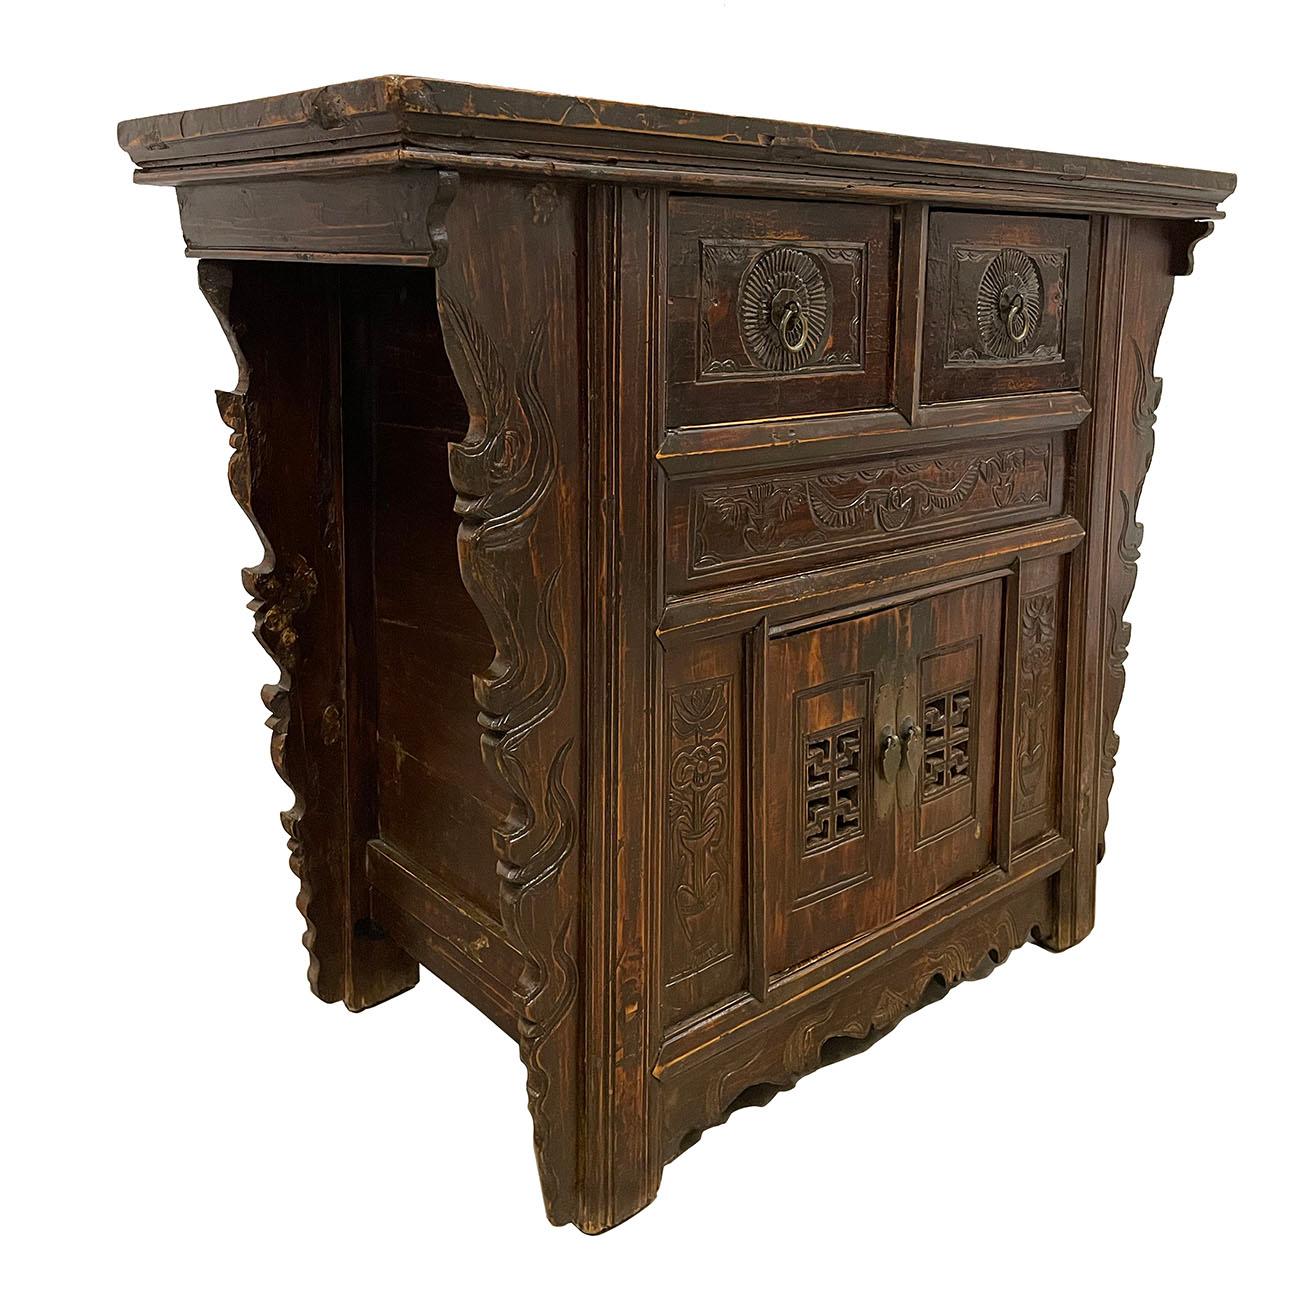 This beautiful antique Chinese coffer table has beautiful traditional Qing style carving works on the front with antique hardware. It features two drawers and one double open doors compartment on the front. Both sides and back are finished. This